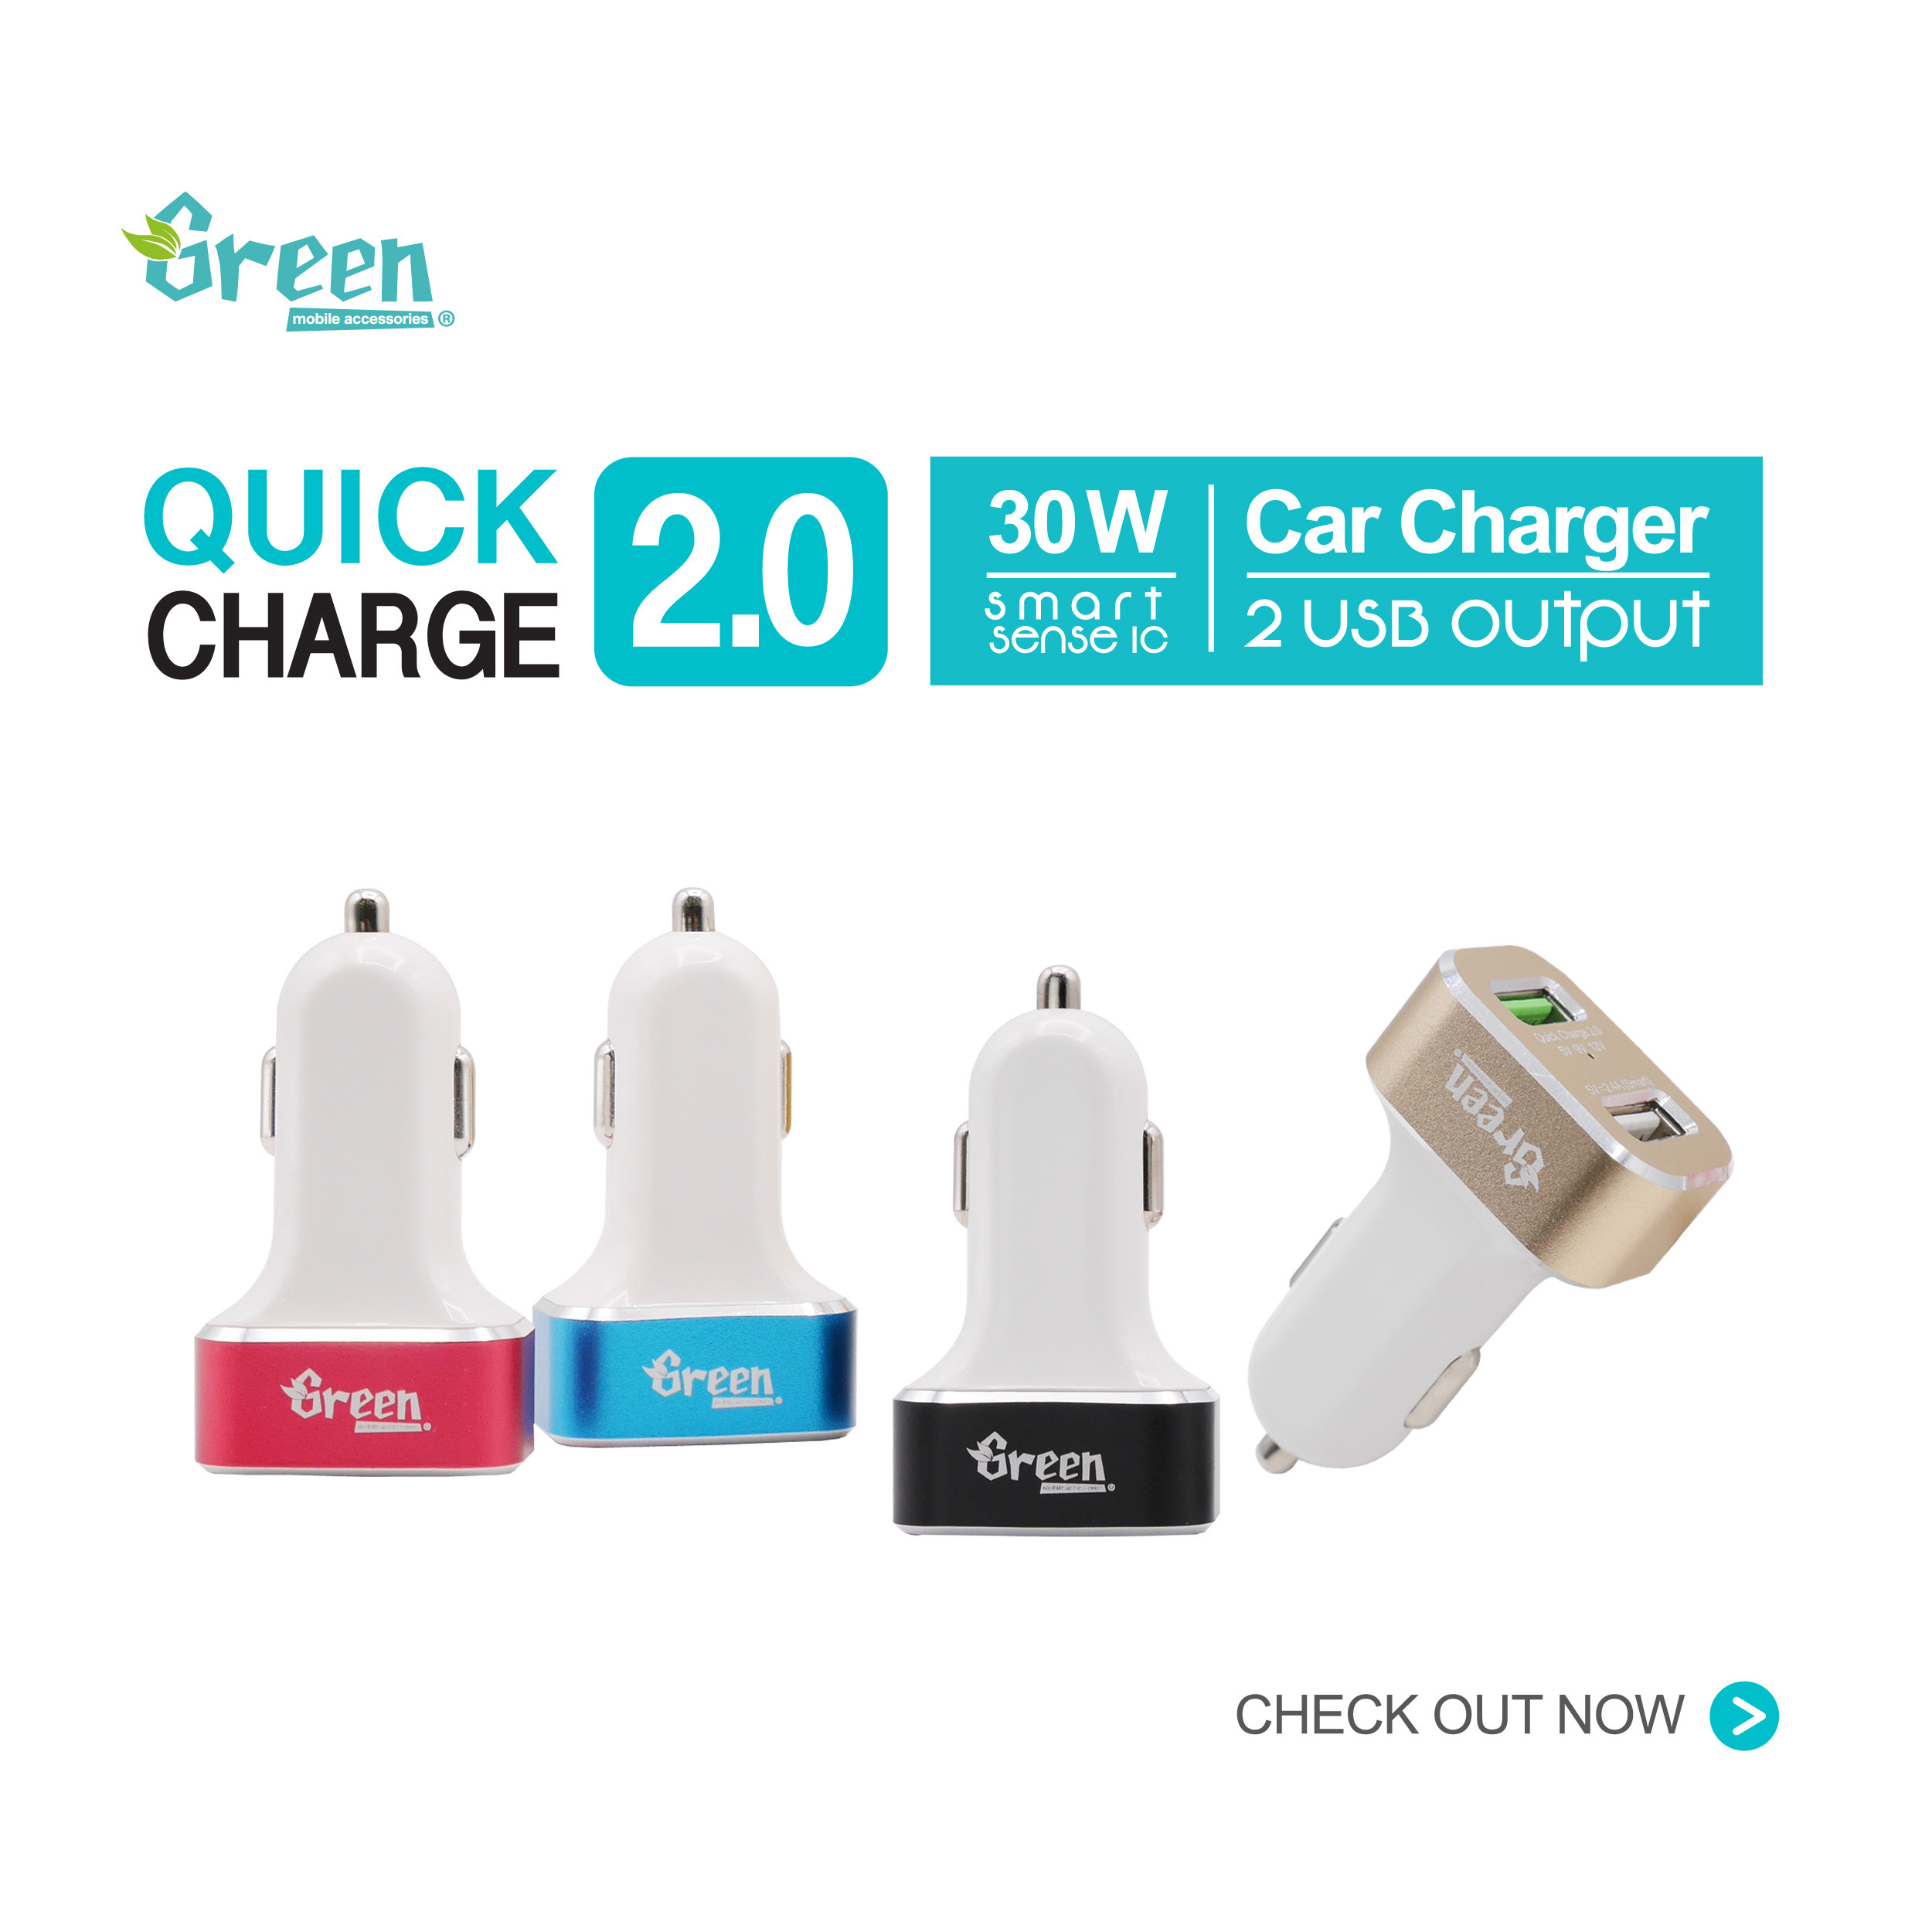 Quick Charge 2.0 30W 2 USB Port | Car Charger (White) GR-CC-QC20